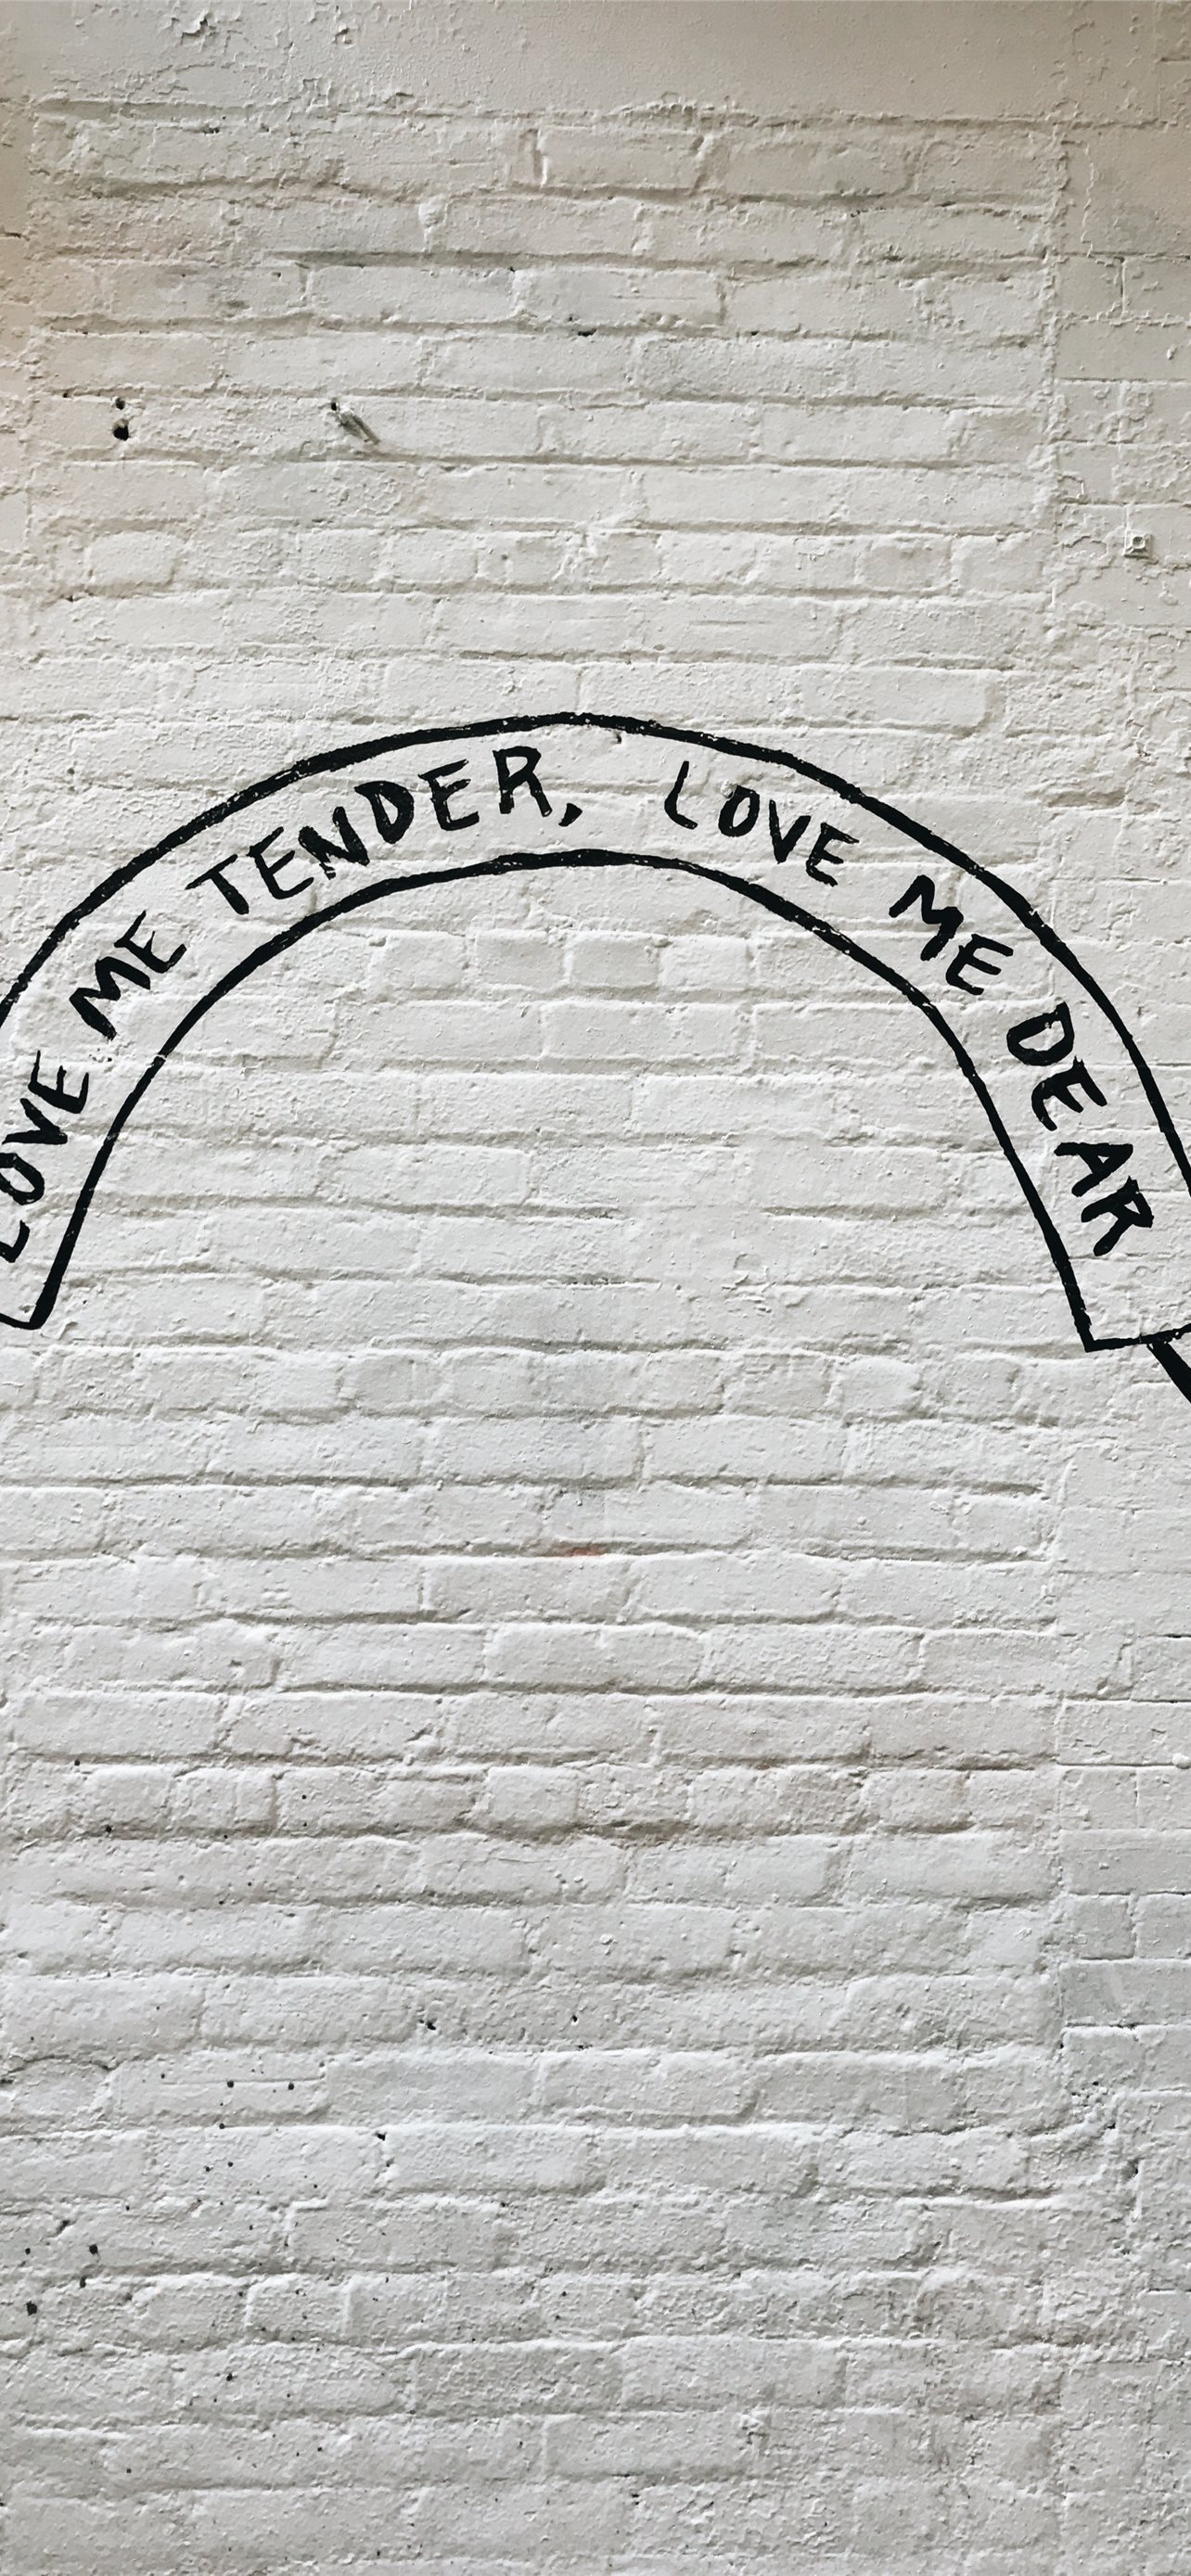 love me tender love me dear wall quotes iPhone 12 Wallpapers Free Download